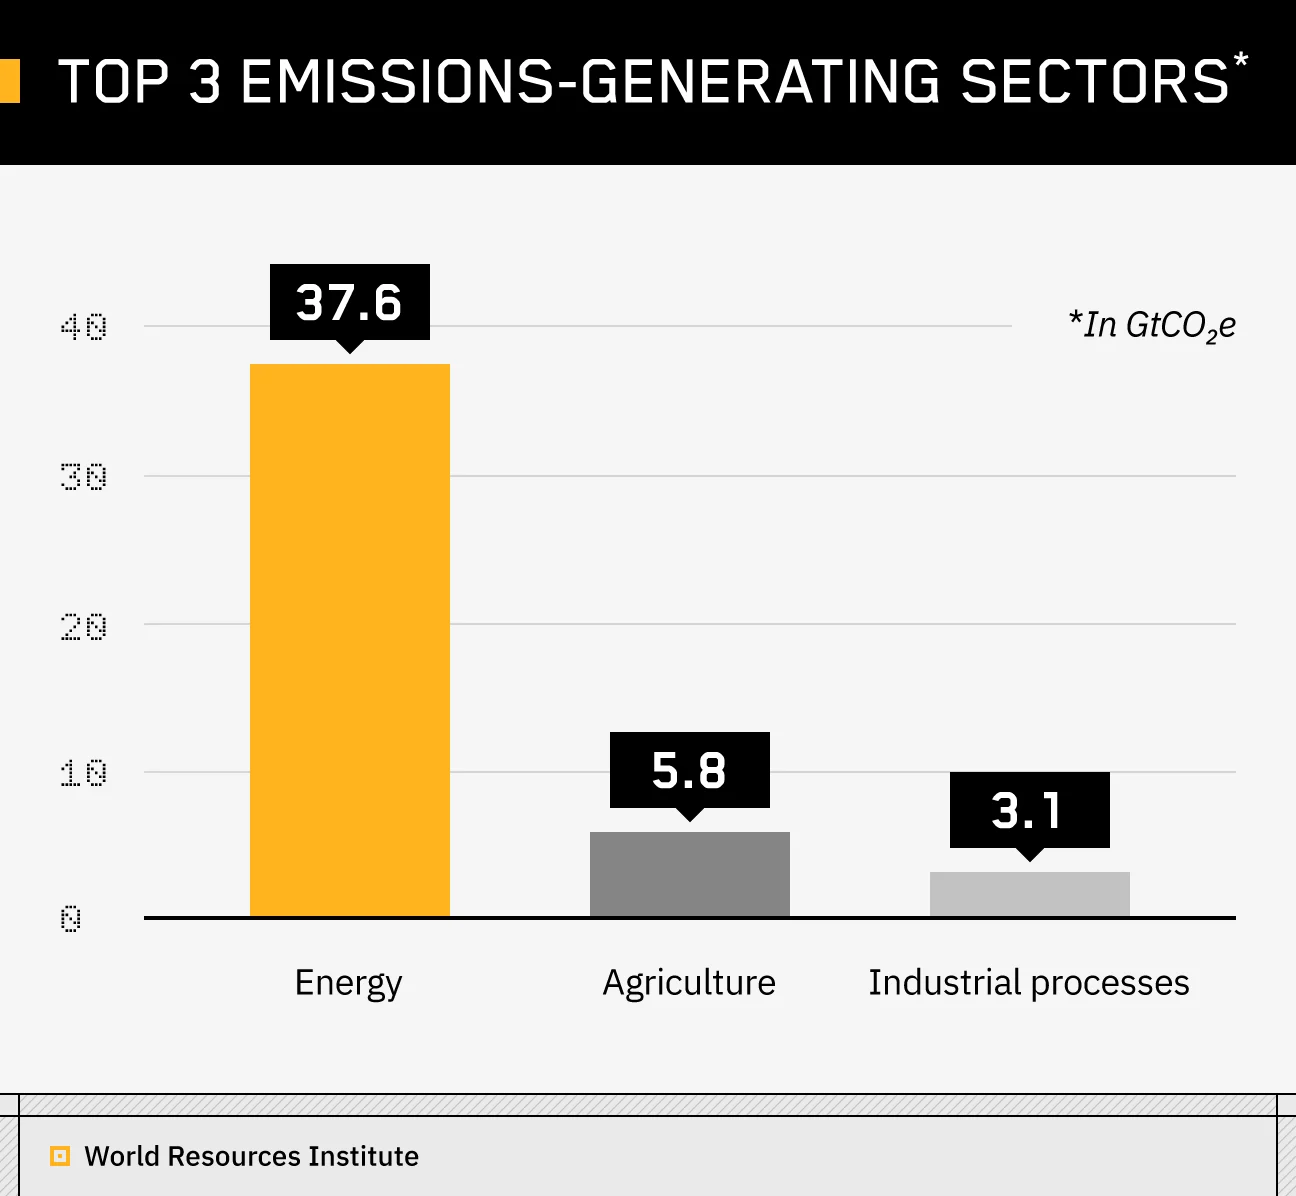 vertical bar chart showing the top three emissions-generating sectors: energy, agriculture and industrial processes